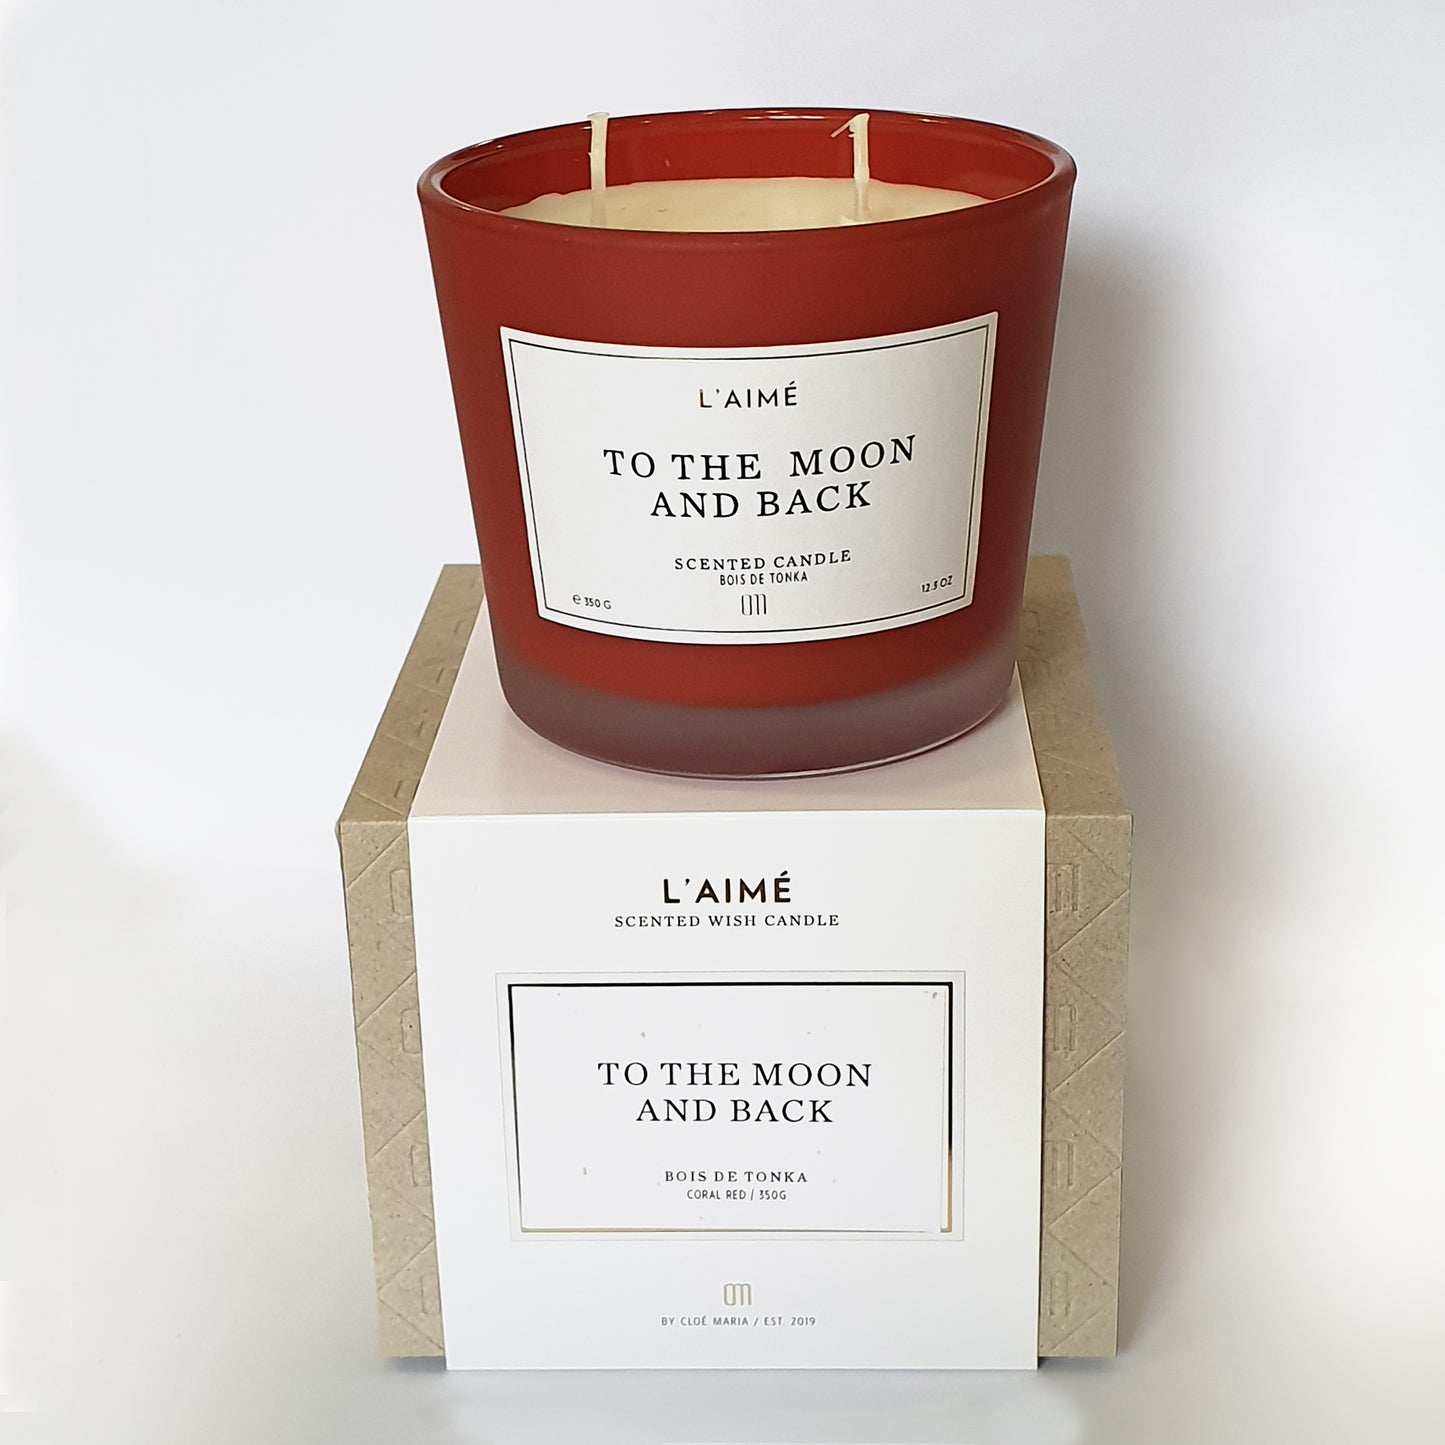 L'aime Scented Candle - "To The Moon And Back"